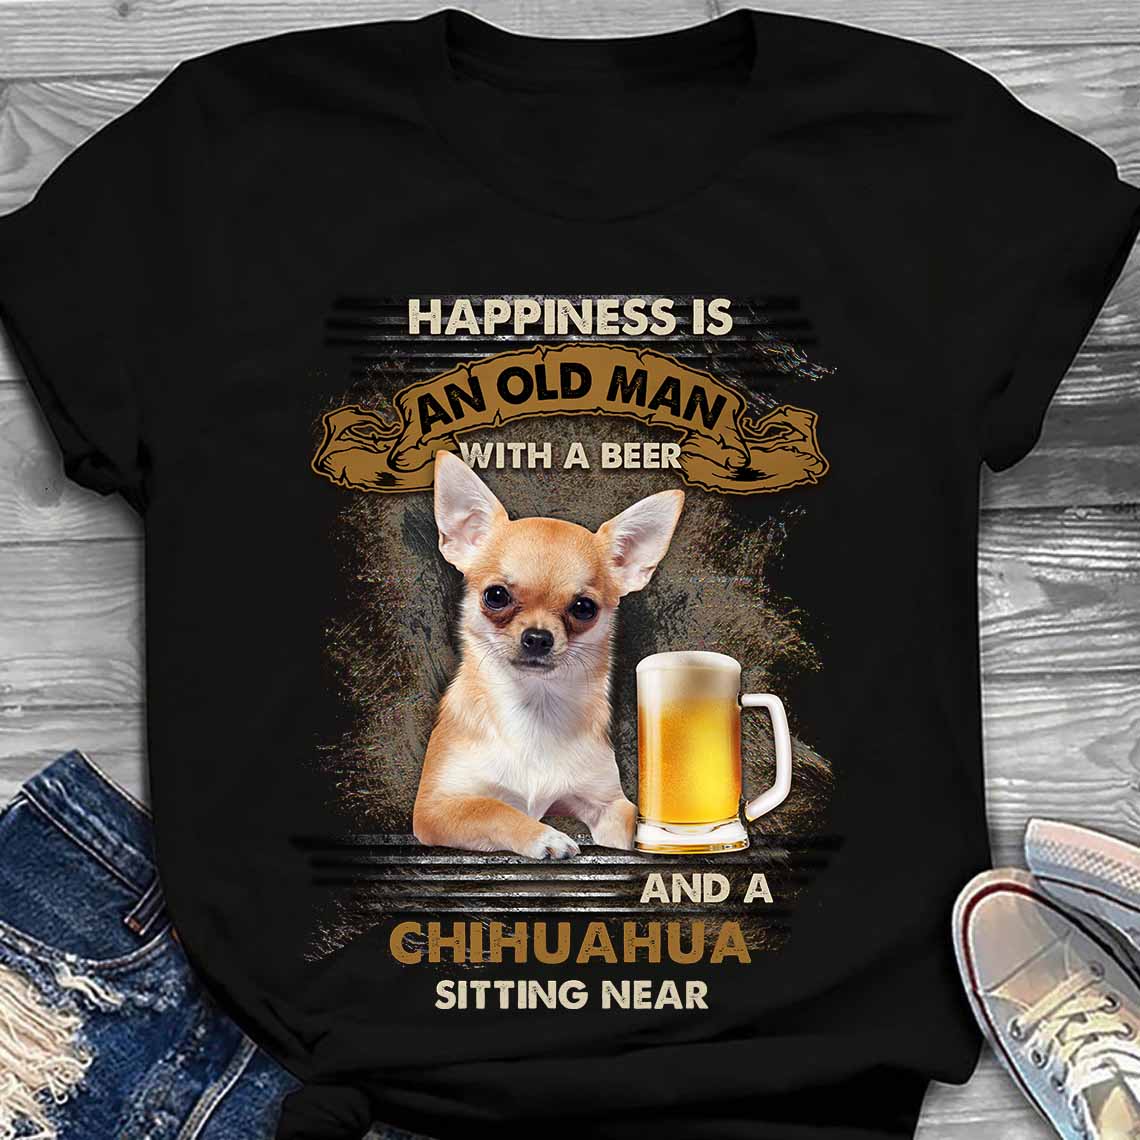 Happiness is an old man and a chihuahua sitting near - Bear lover, T-shirt for dog lover